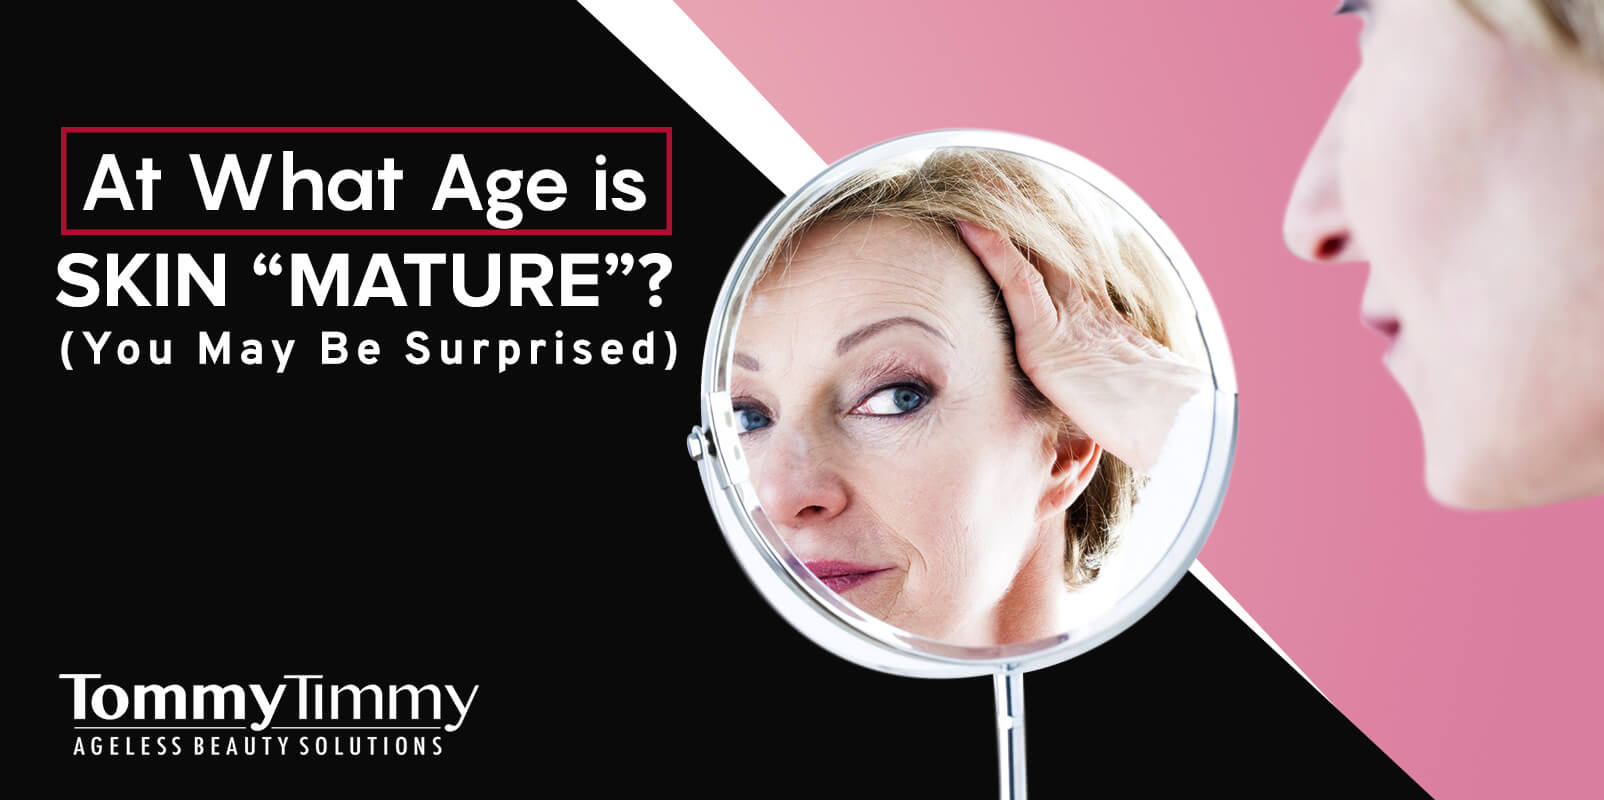 At What Age is Skin “Mature”? (You May Be Surprised)